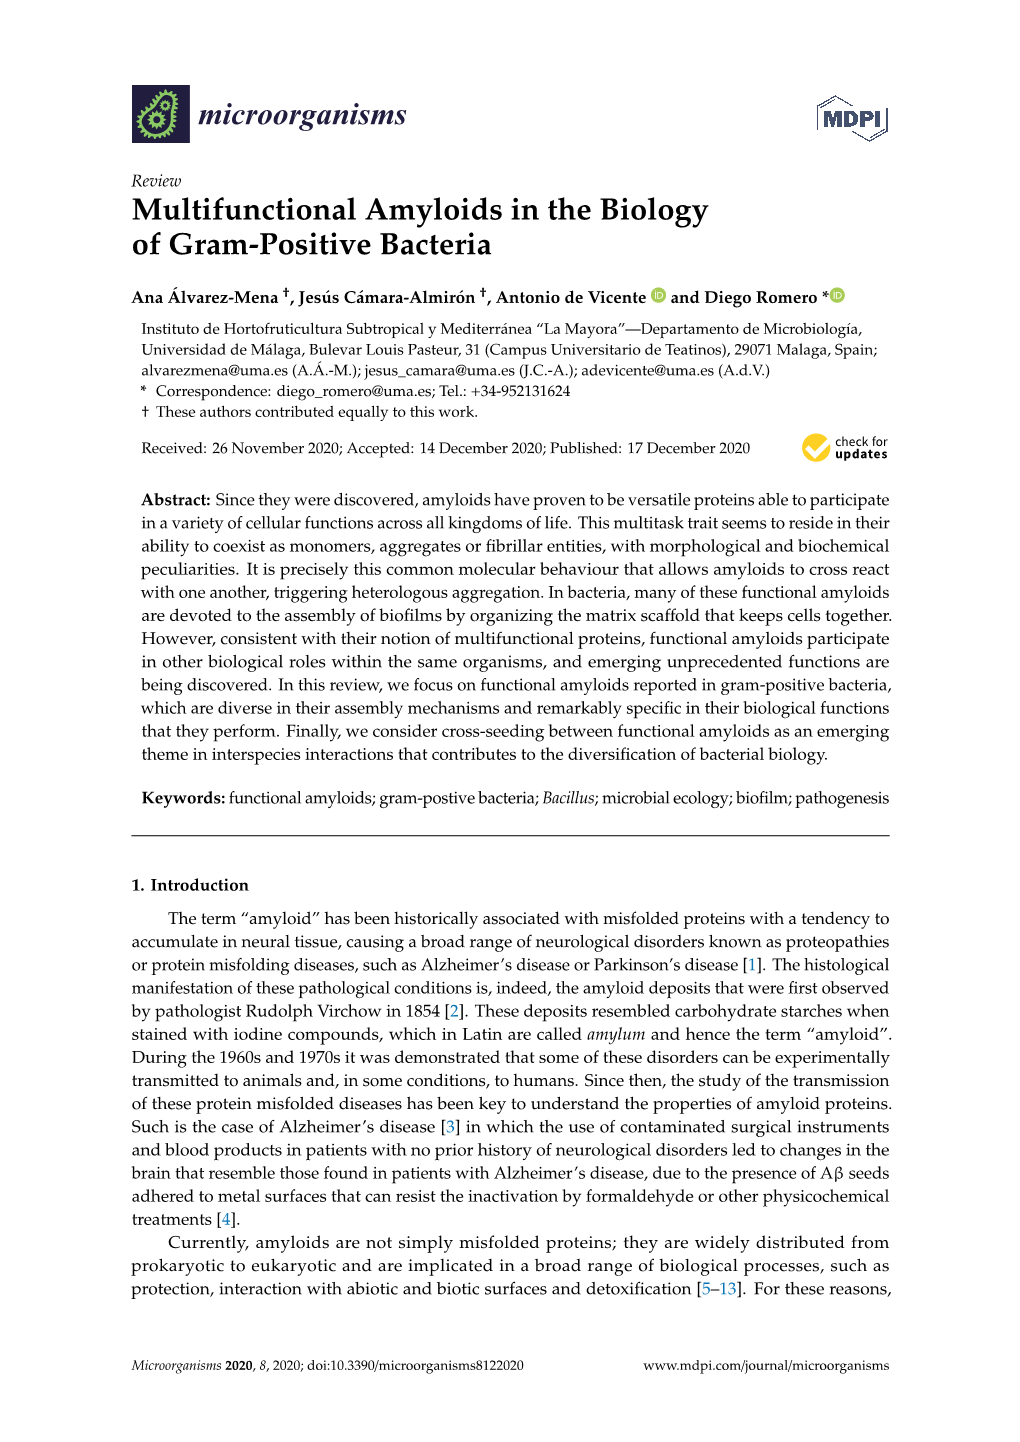 Multifunctional Amyloids in the Biology of Gram-Positive Bacteria